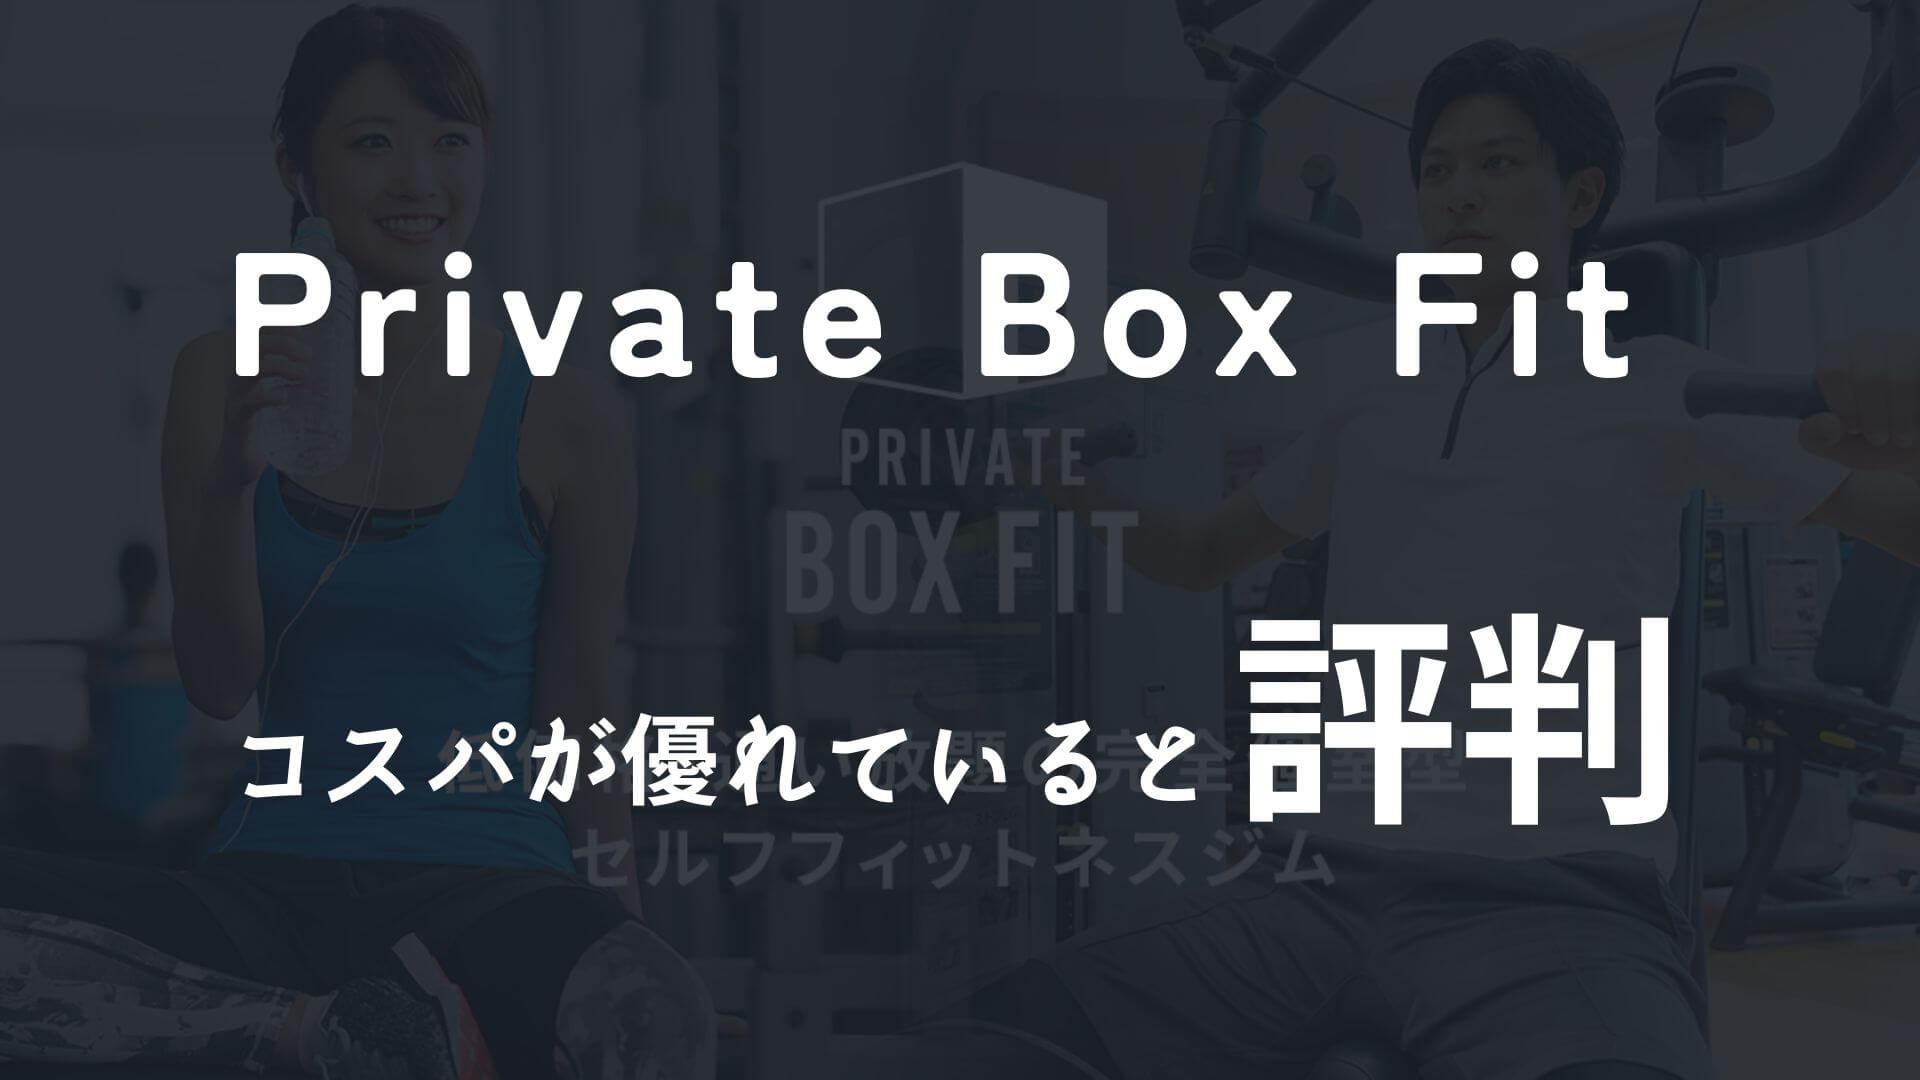 Private Box Fitはコスパが優れていると評判でした！